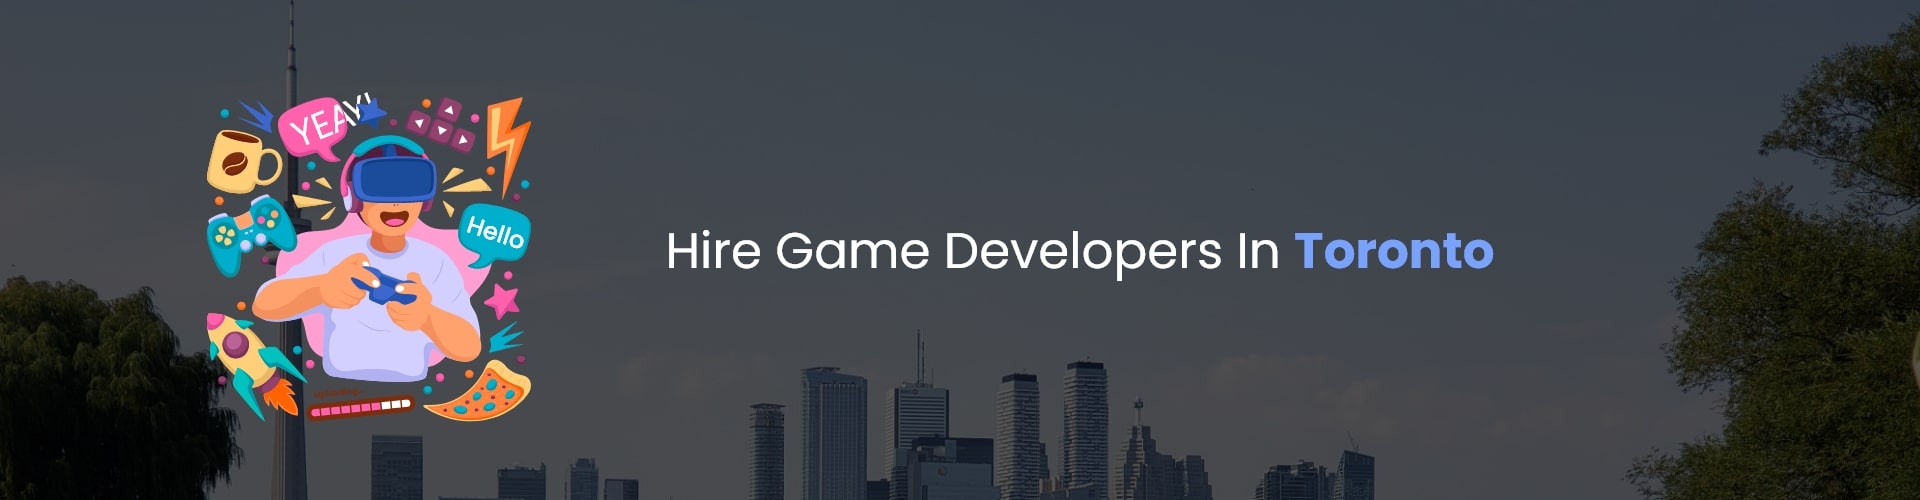 hire game developers in toronto